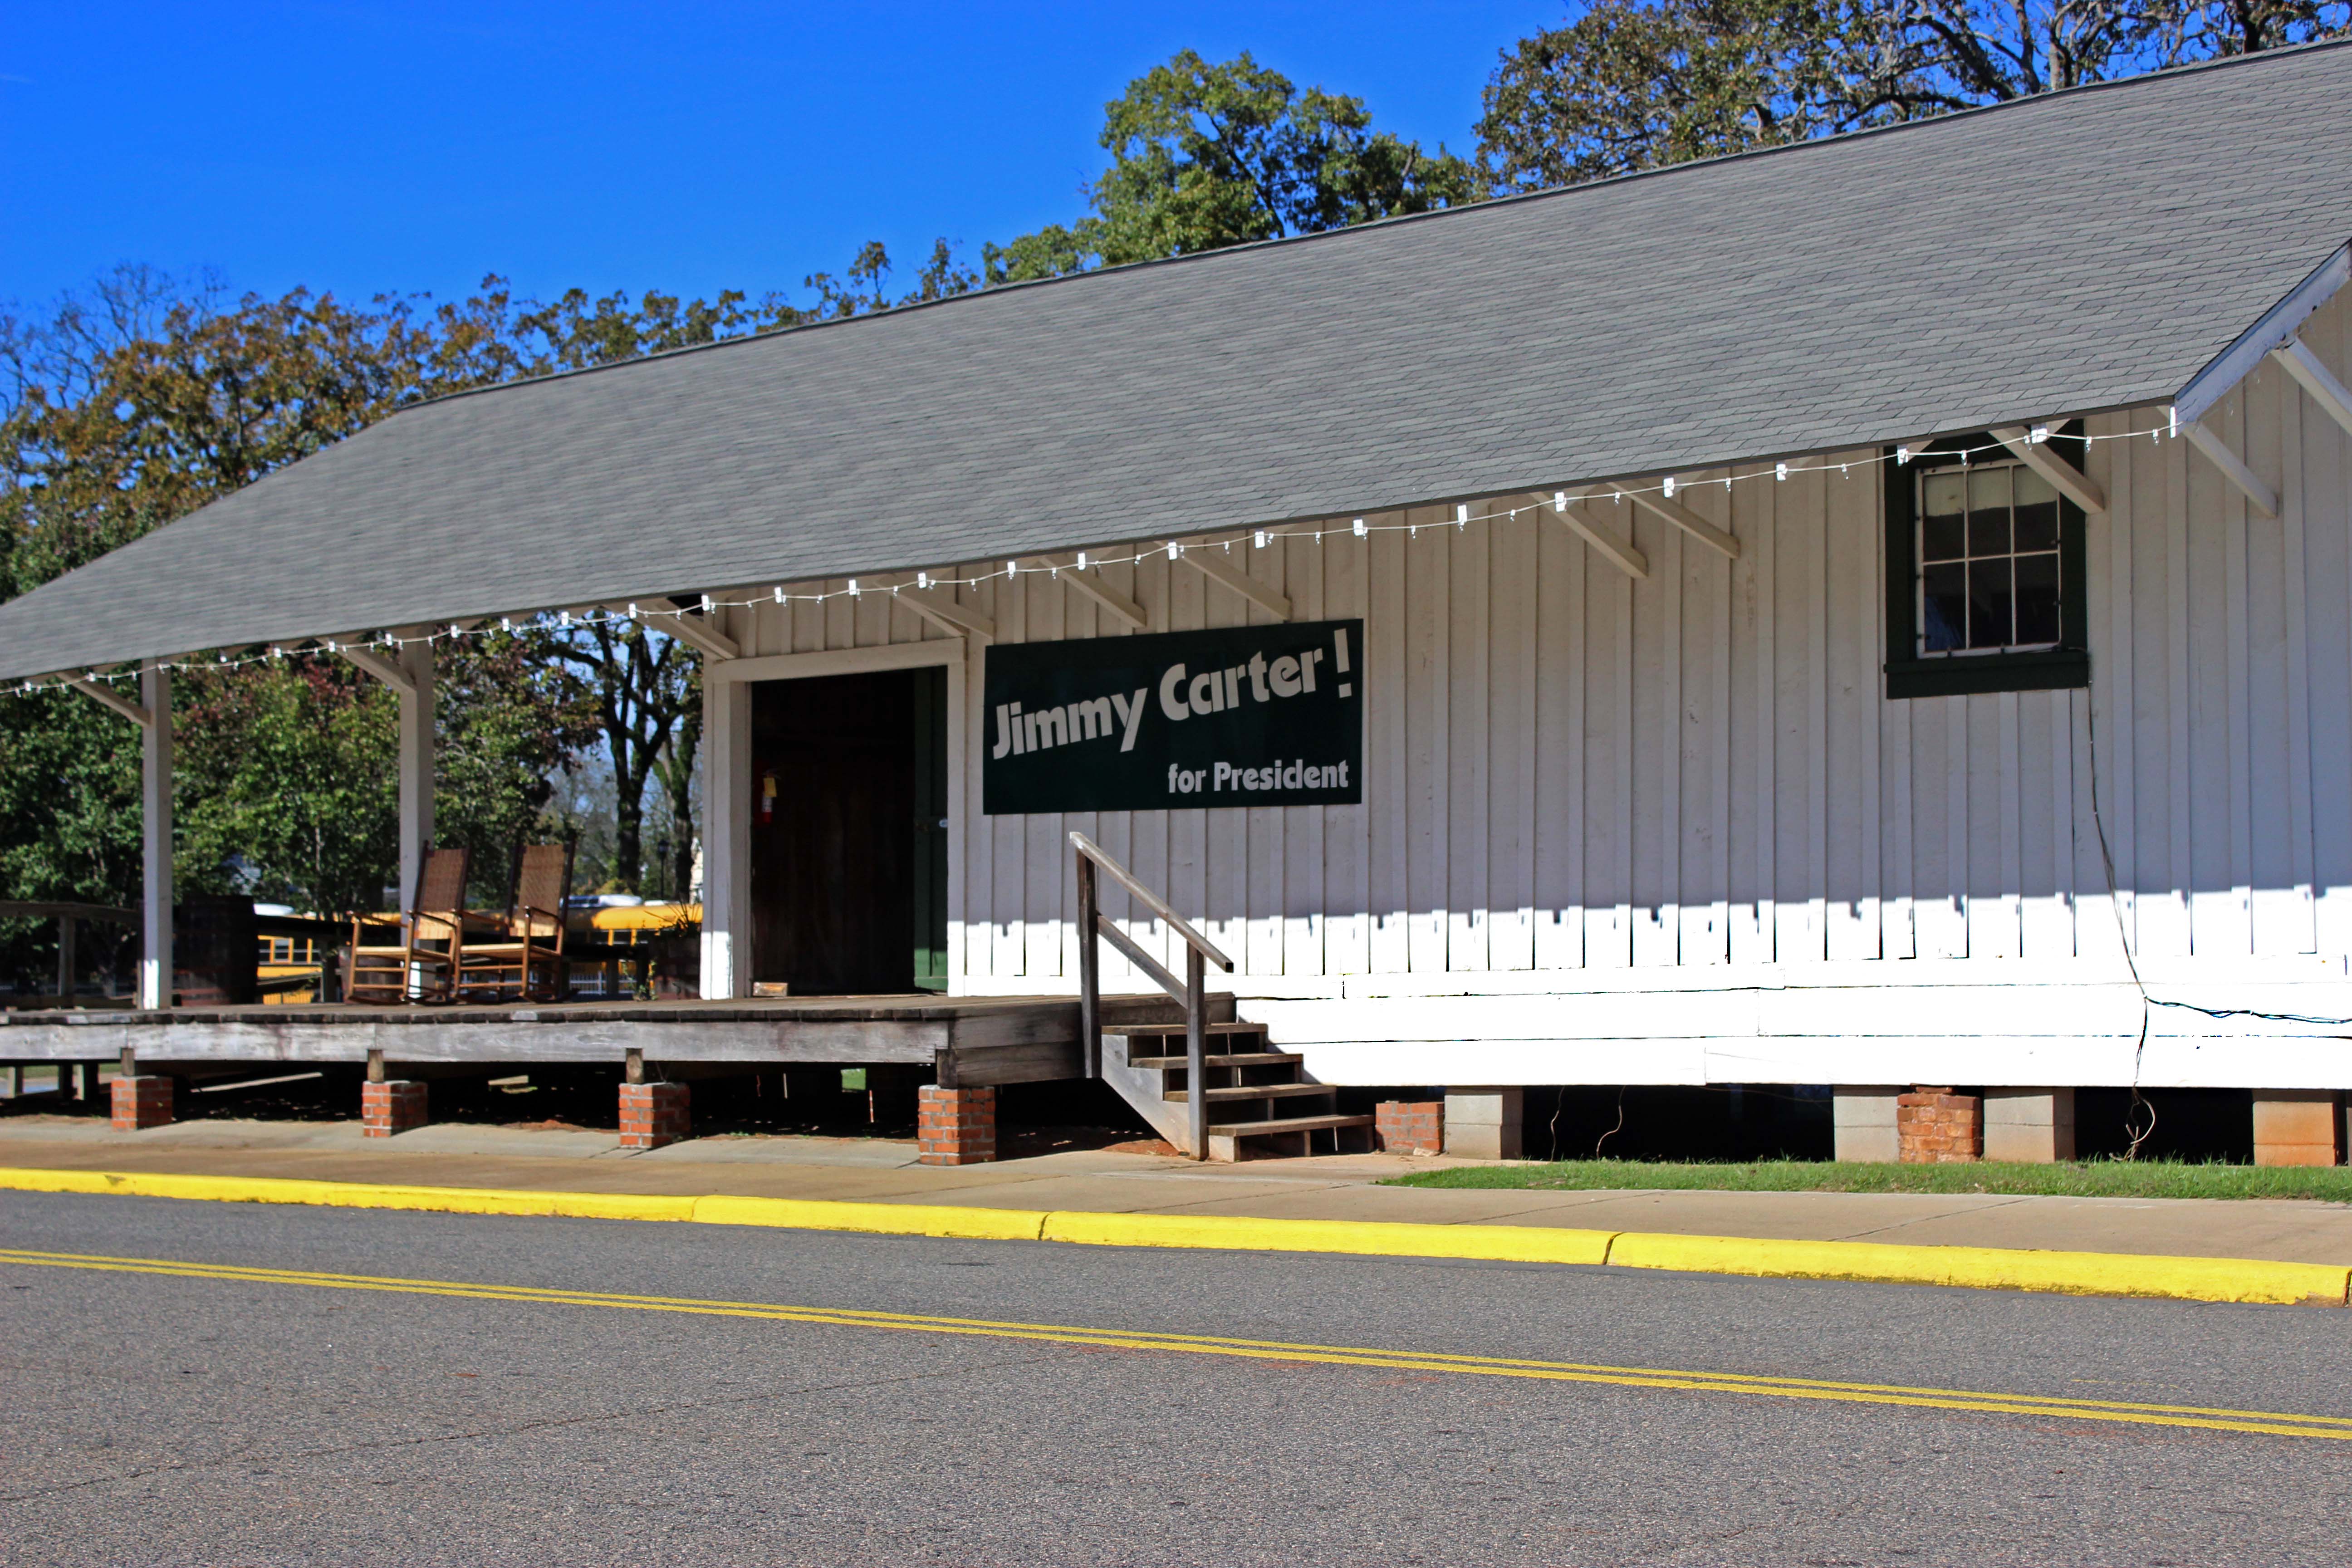 The Plains train depot that President Carter used as the 1976 campaign headquarters.